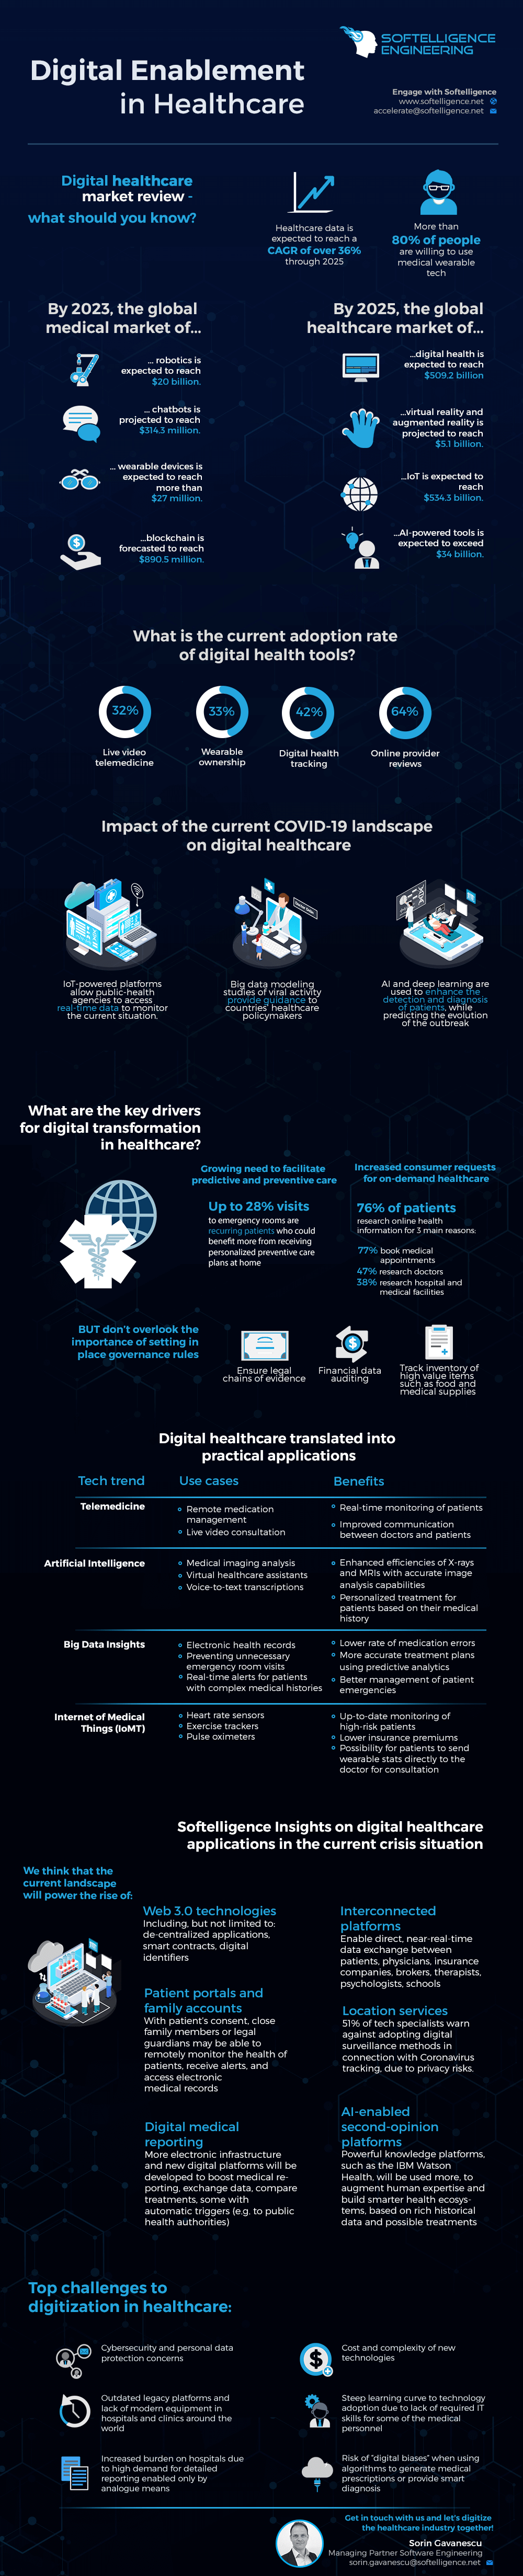 Infographic: Digital Enablement in Healthcare